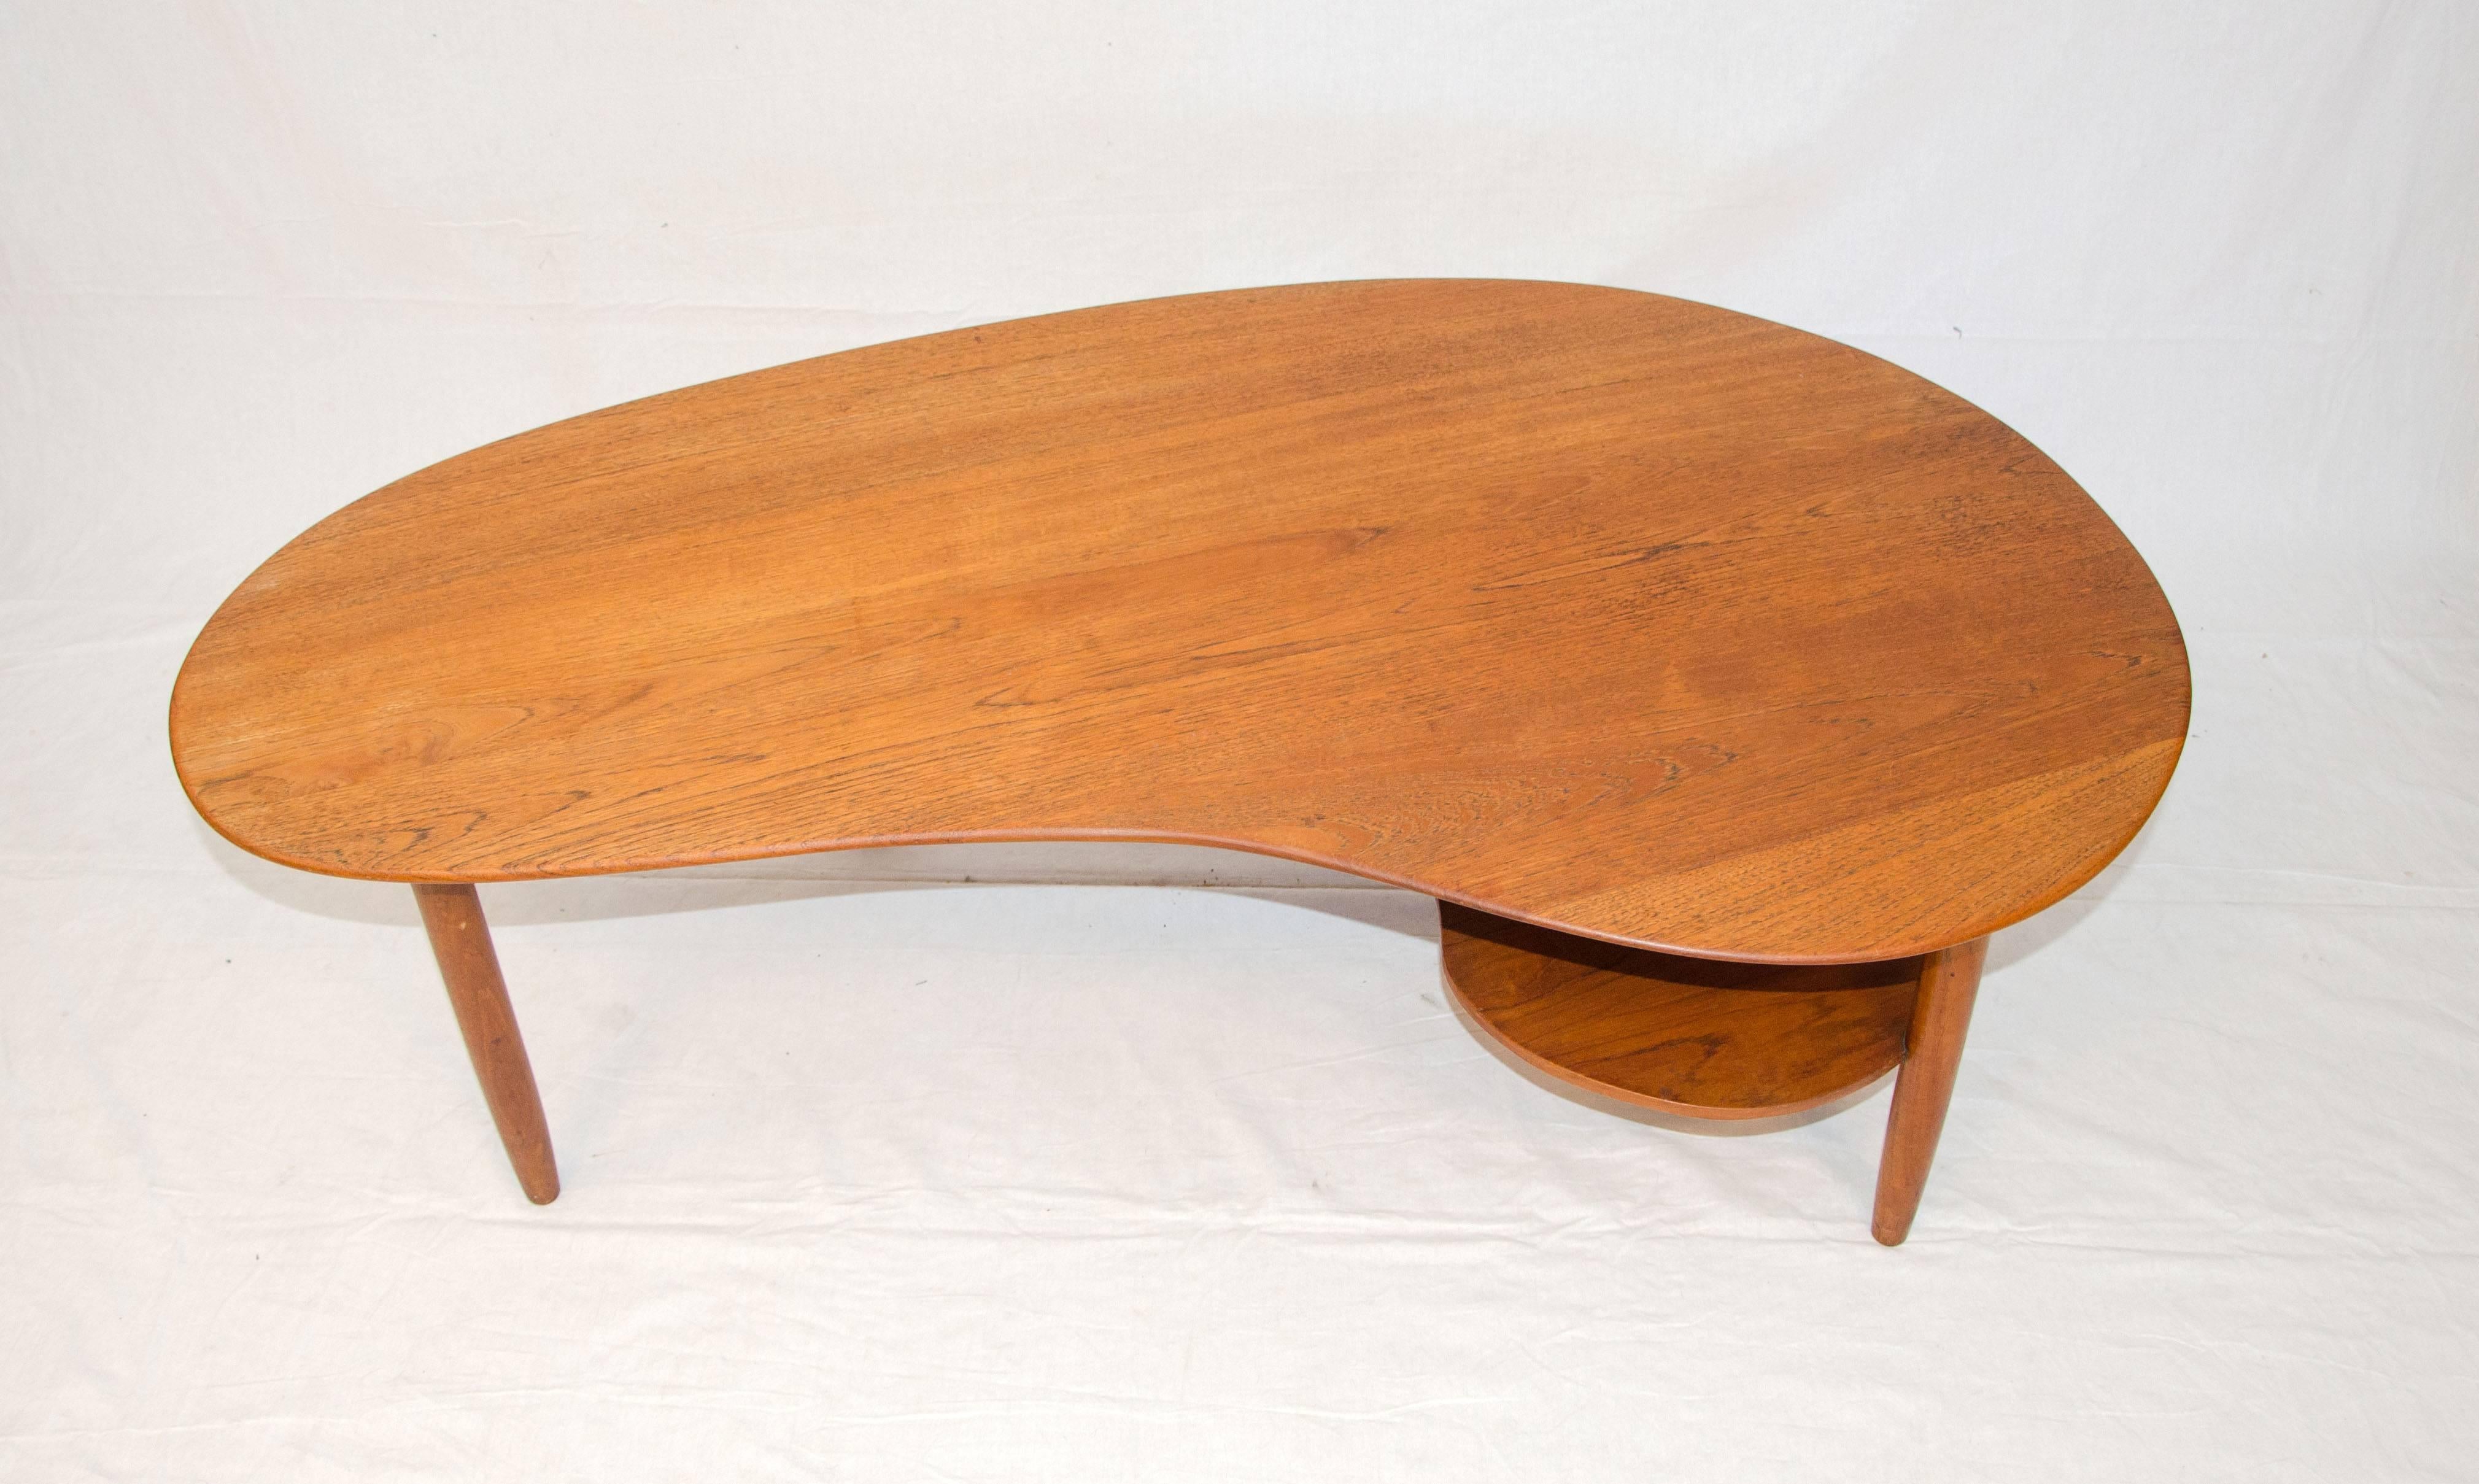 Nice teak kidney or organic shaped coffee table with a second smaller shelf under the top. The top and round tapered legs are solid teak. The second shelf is teak veneer. The second shelf is shaped somewhat like a painter's palette.
The second